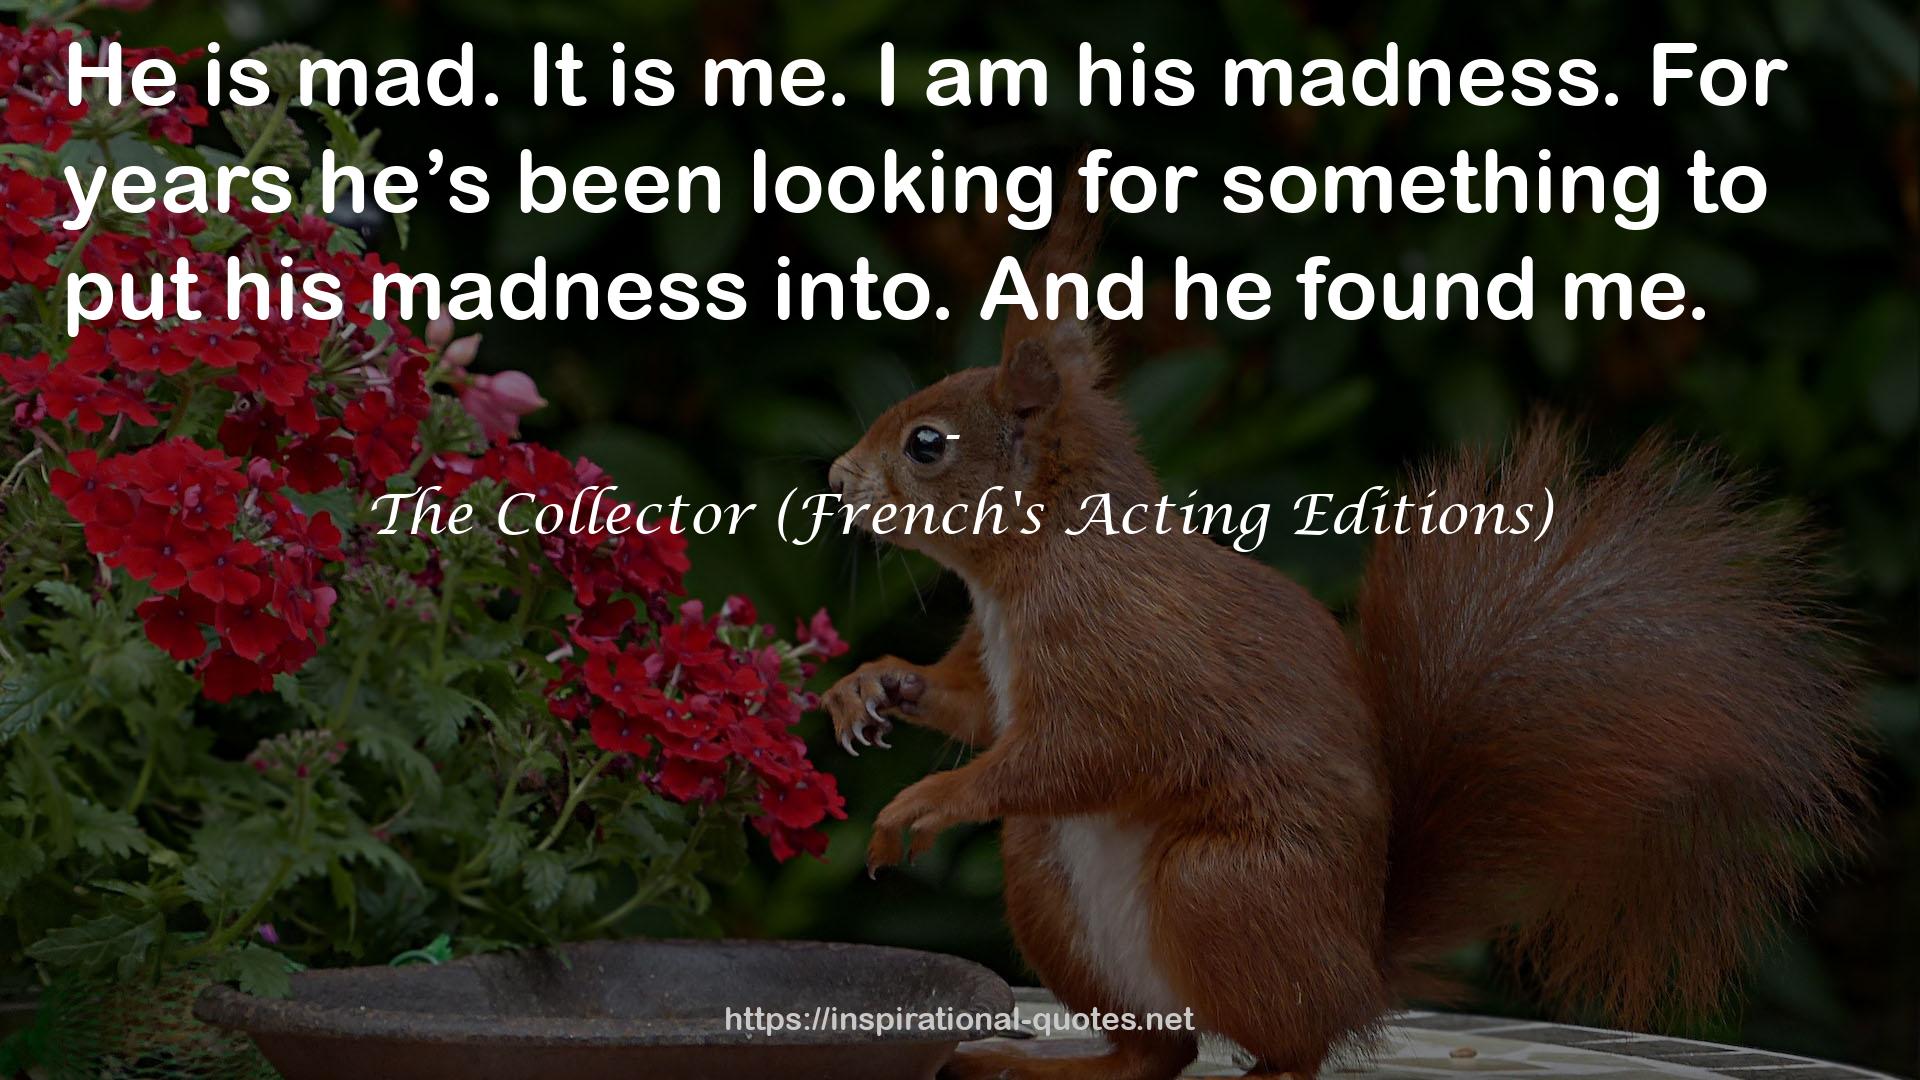 The Collector (French's Acting Editions) QUOTES